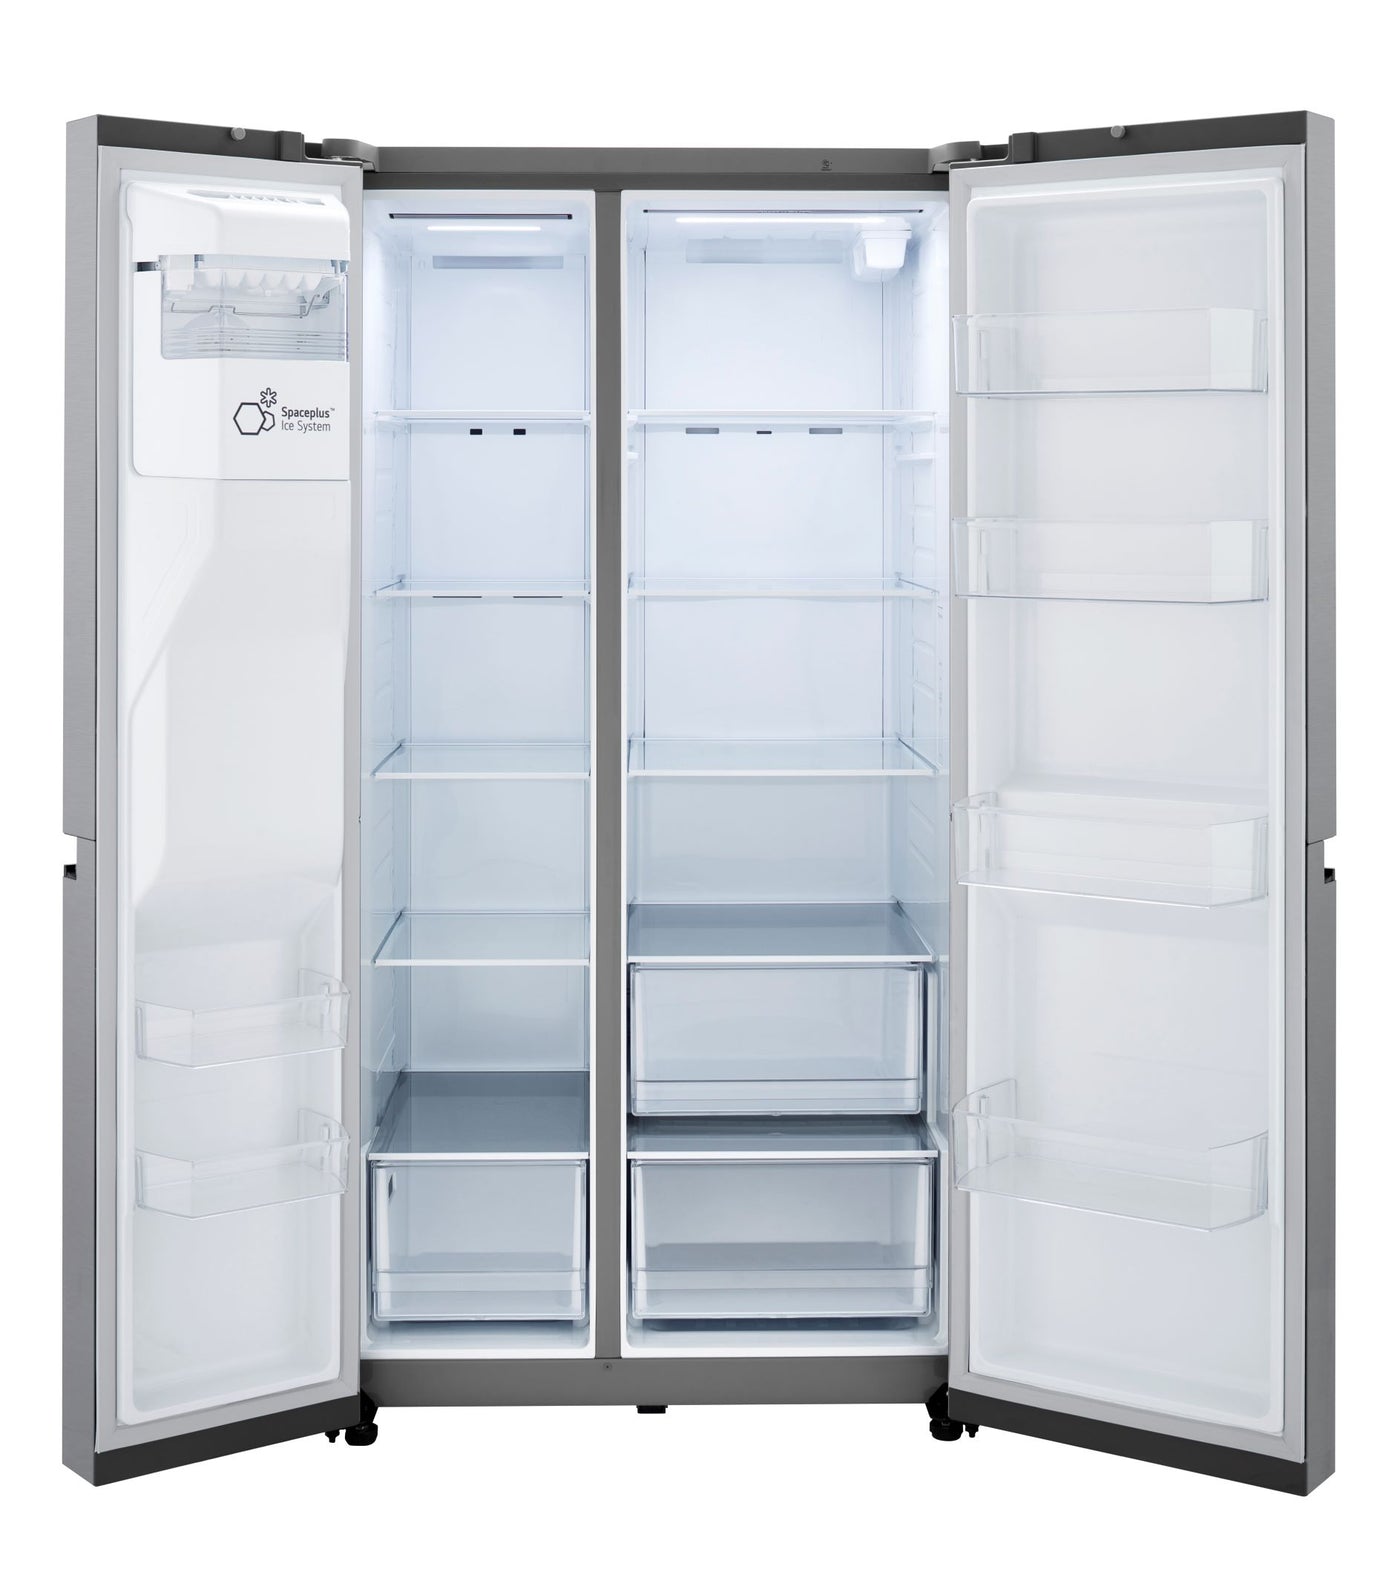 LG Platinum Silver 36" Side by Side Refrigerator with Smooth Touch Dispenser (27 Cu.Ft) - LRSXS2706V